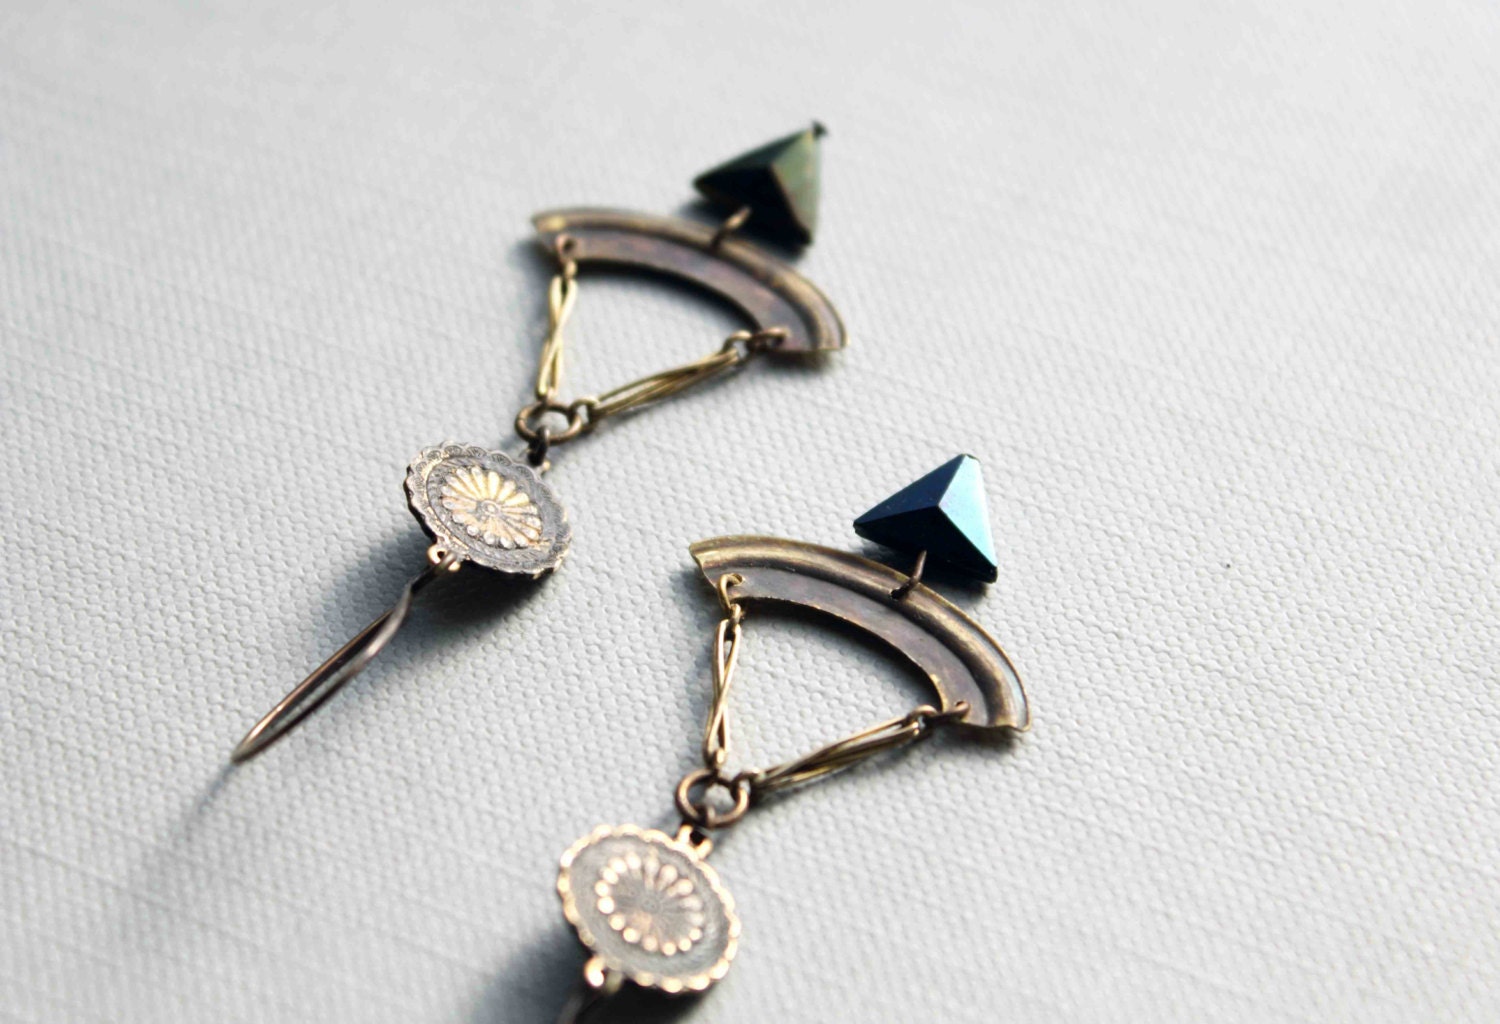 Compass earrings vintage brass triangle beads reclaimed parts - LucieTales